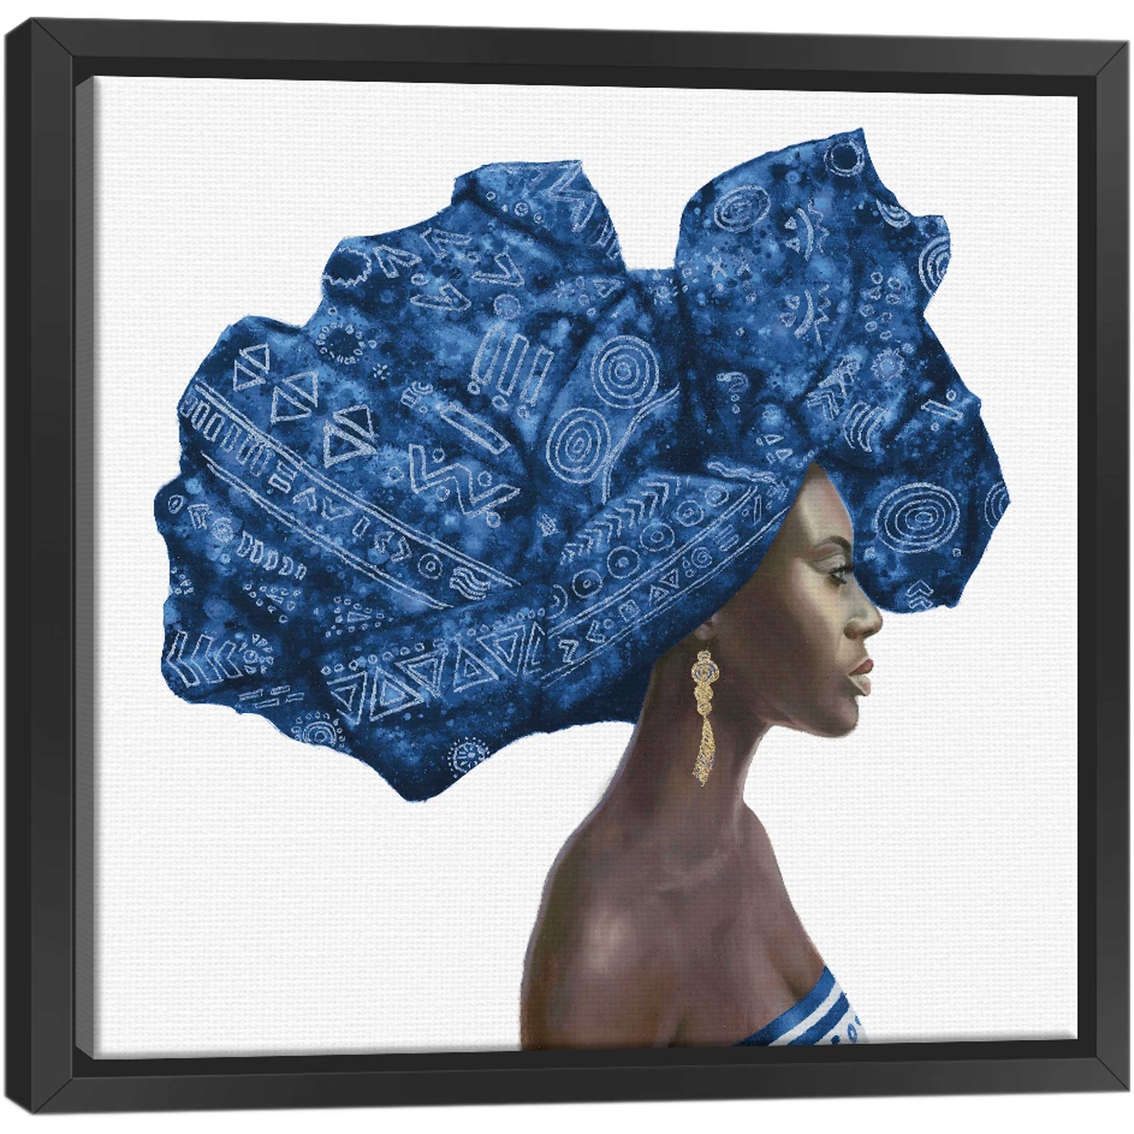 Inkstry Pure Style II Blue Gallery Wrap Canvas Print - Image 2 of 3